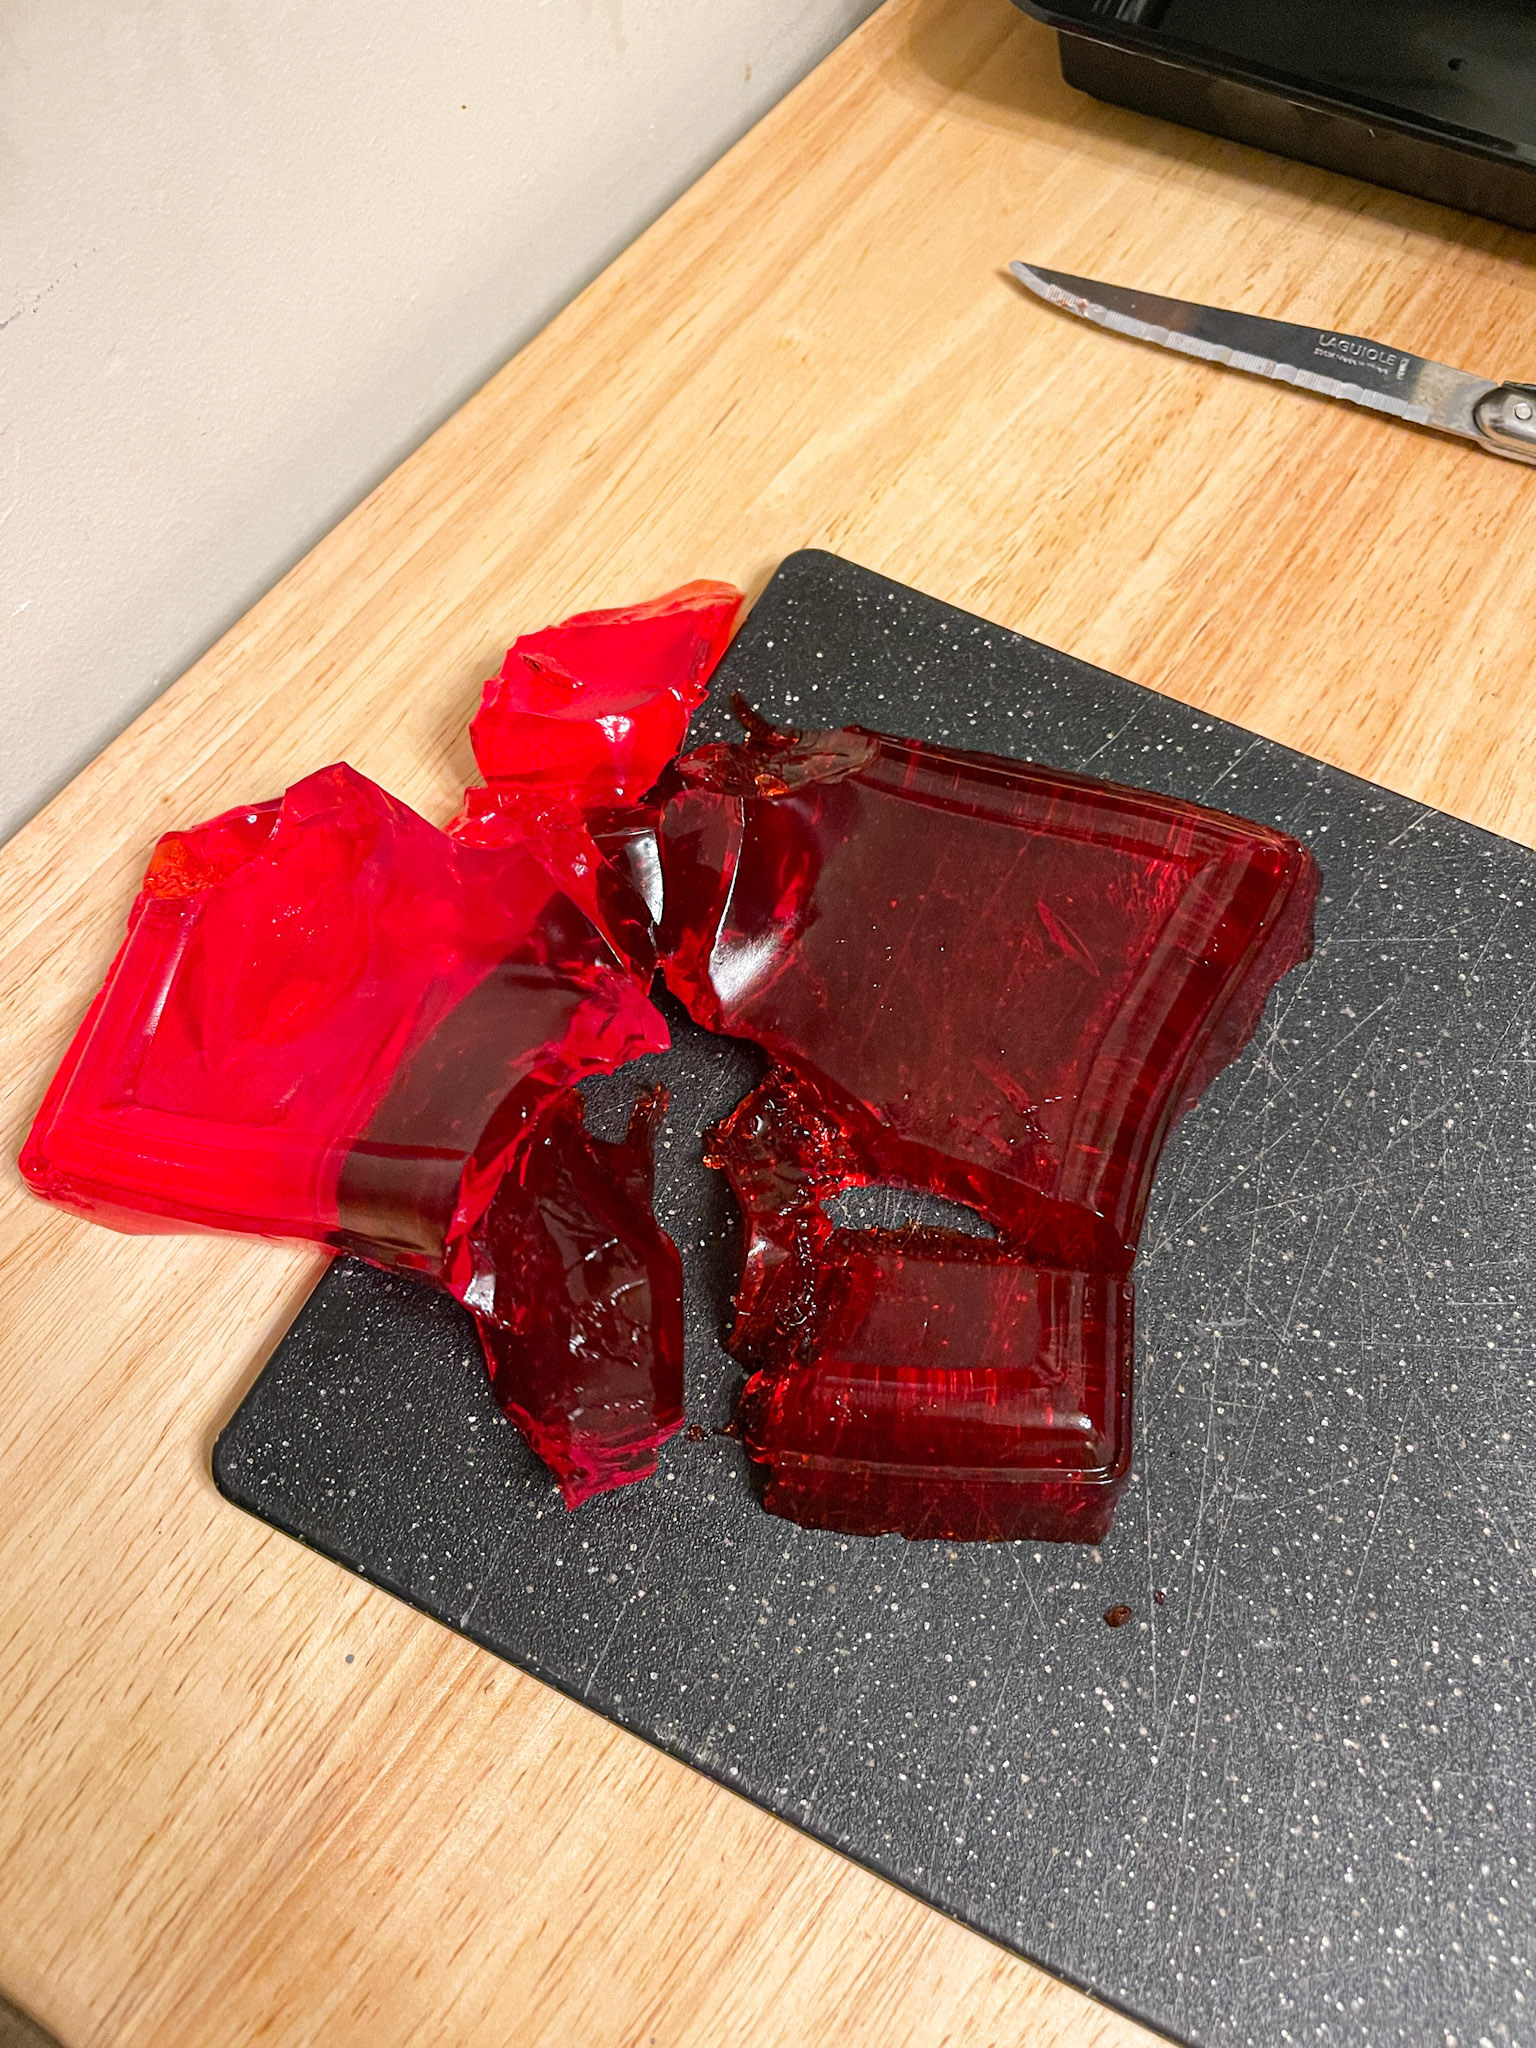 collapsed jello in pieces on cutting board